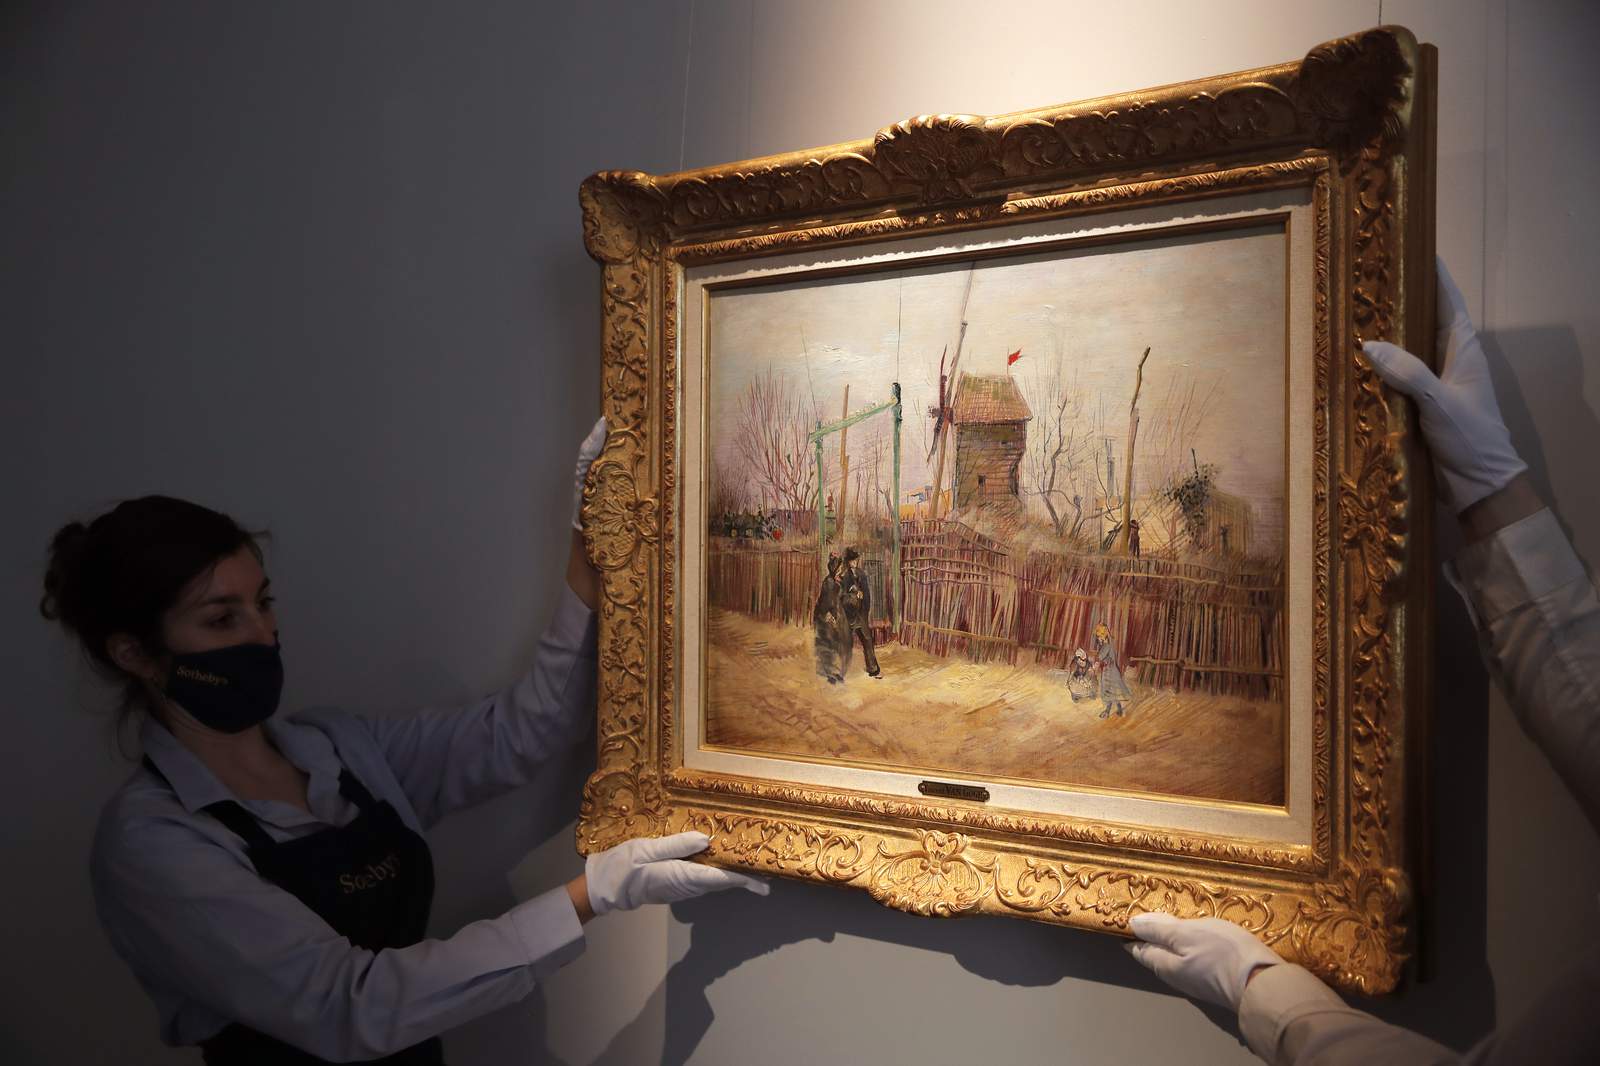 Rarely seen Van Gogh painting exhibited ahead of auction